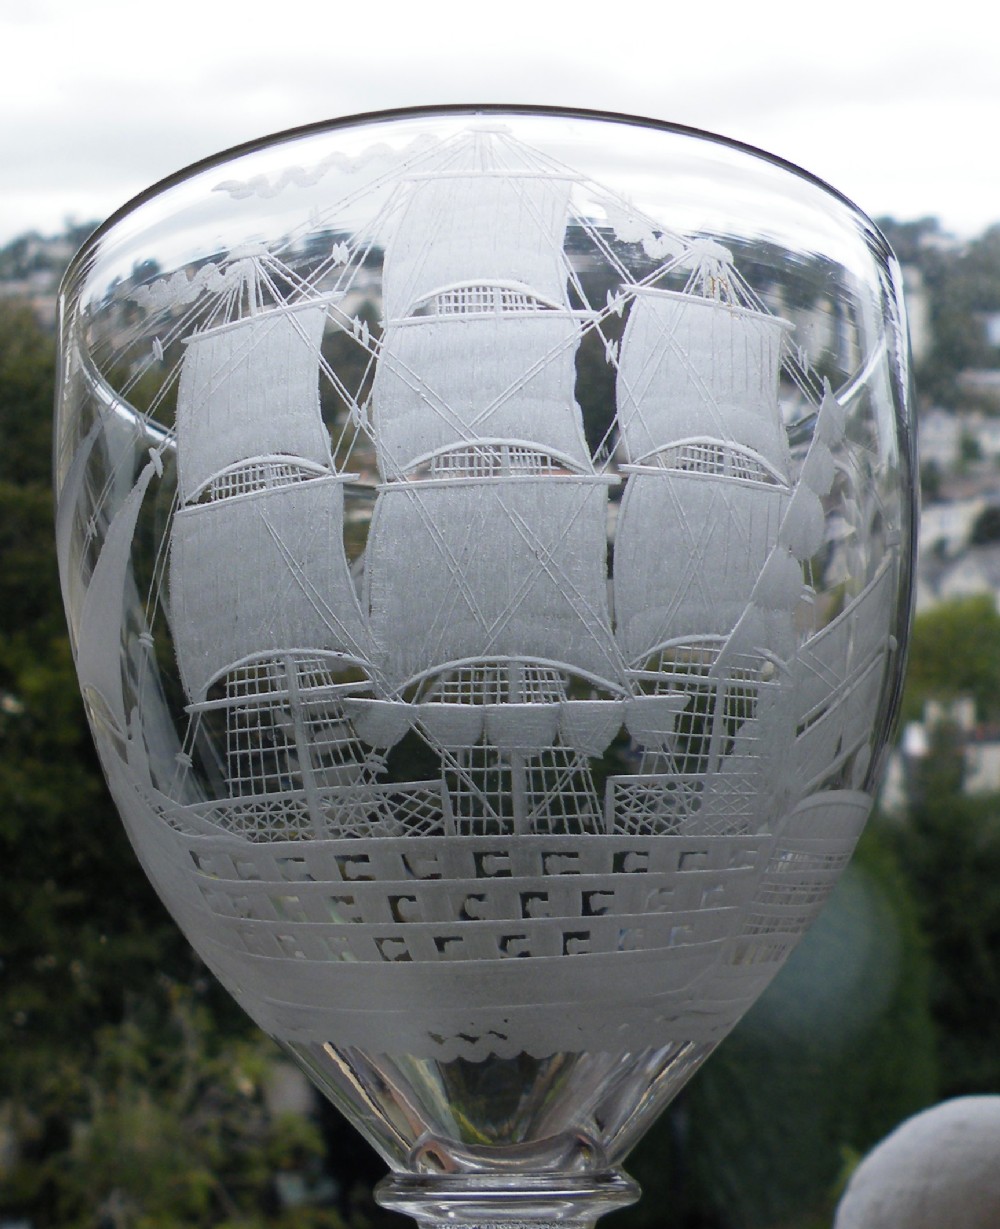 a large early 19th century nelson commemorative engraved glass rummergoblet